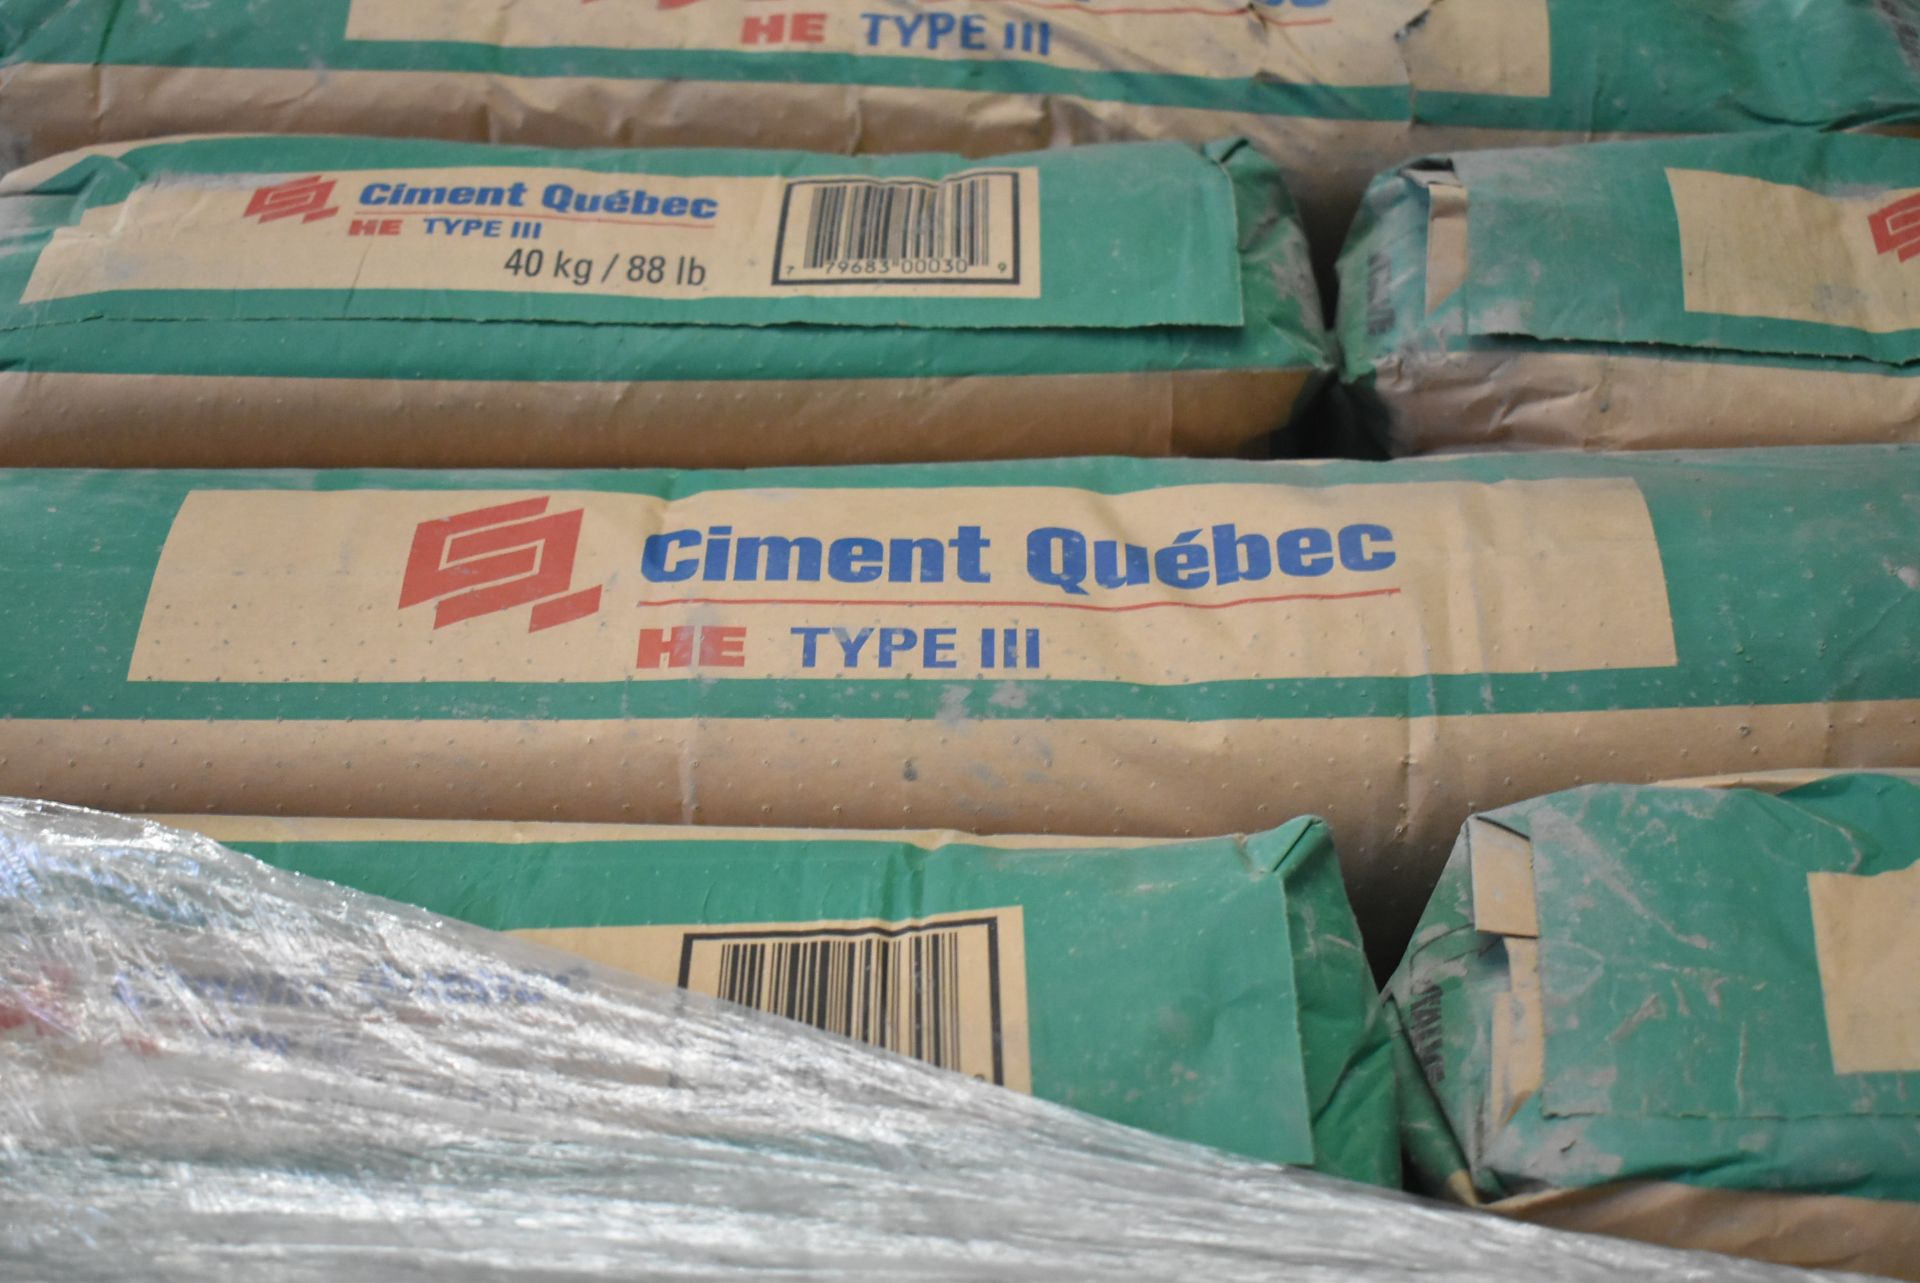 LOT/ PALLET WITH CONTENTS CONSISTING OF CIMENT QUEBEC HE TYPE III CONCRETE MIX - Image 2 of 2